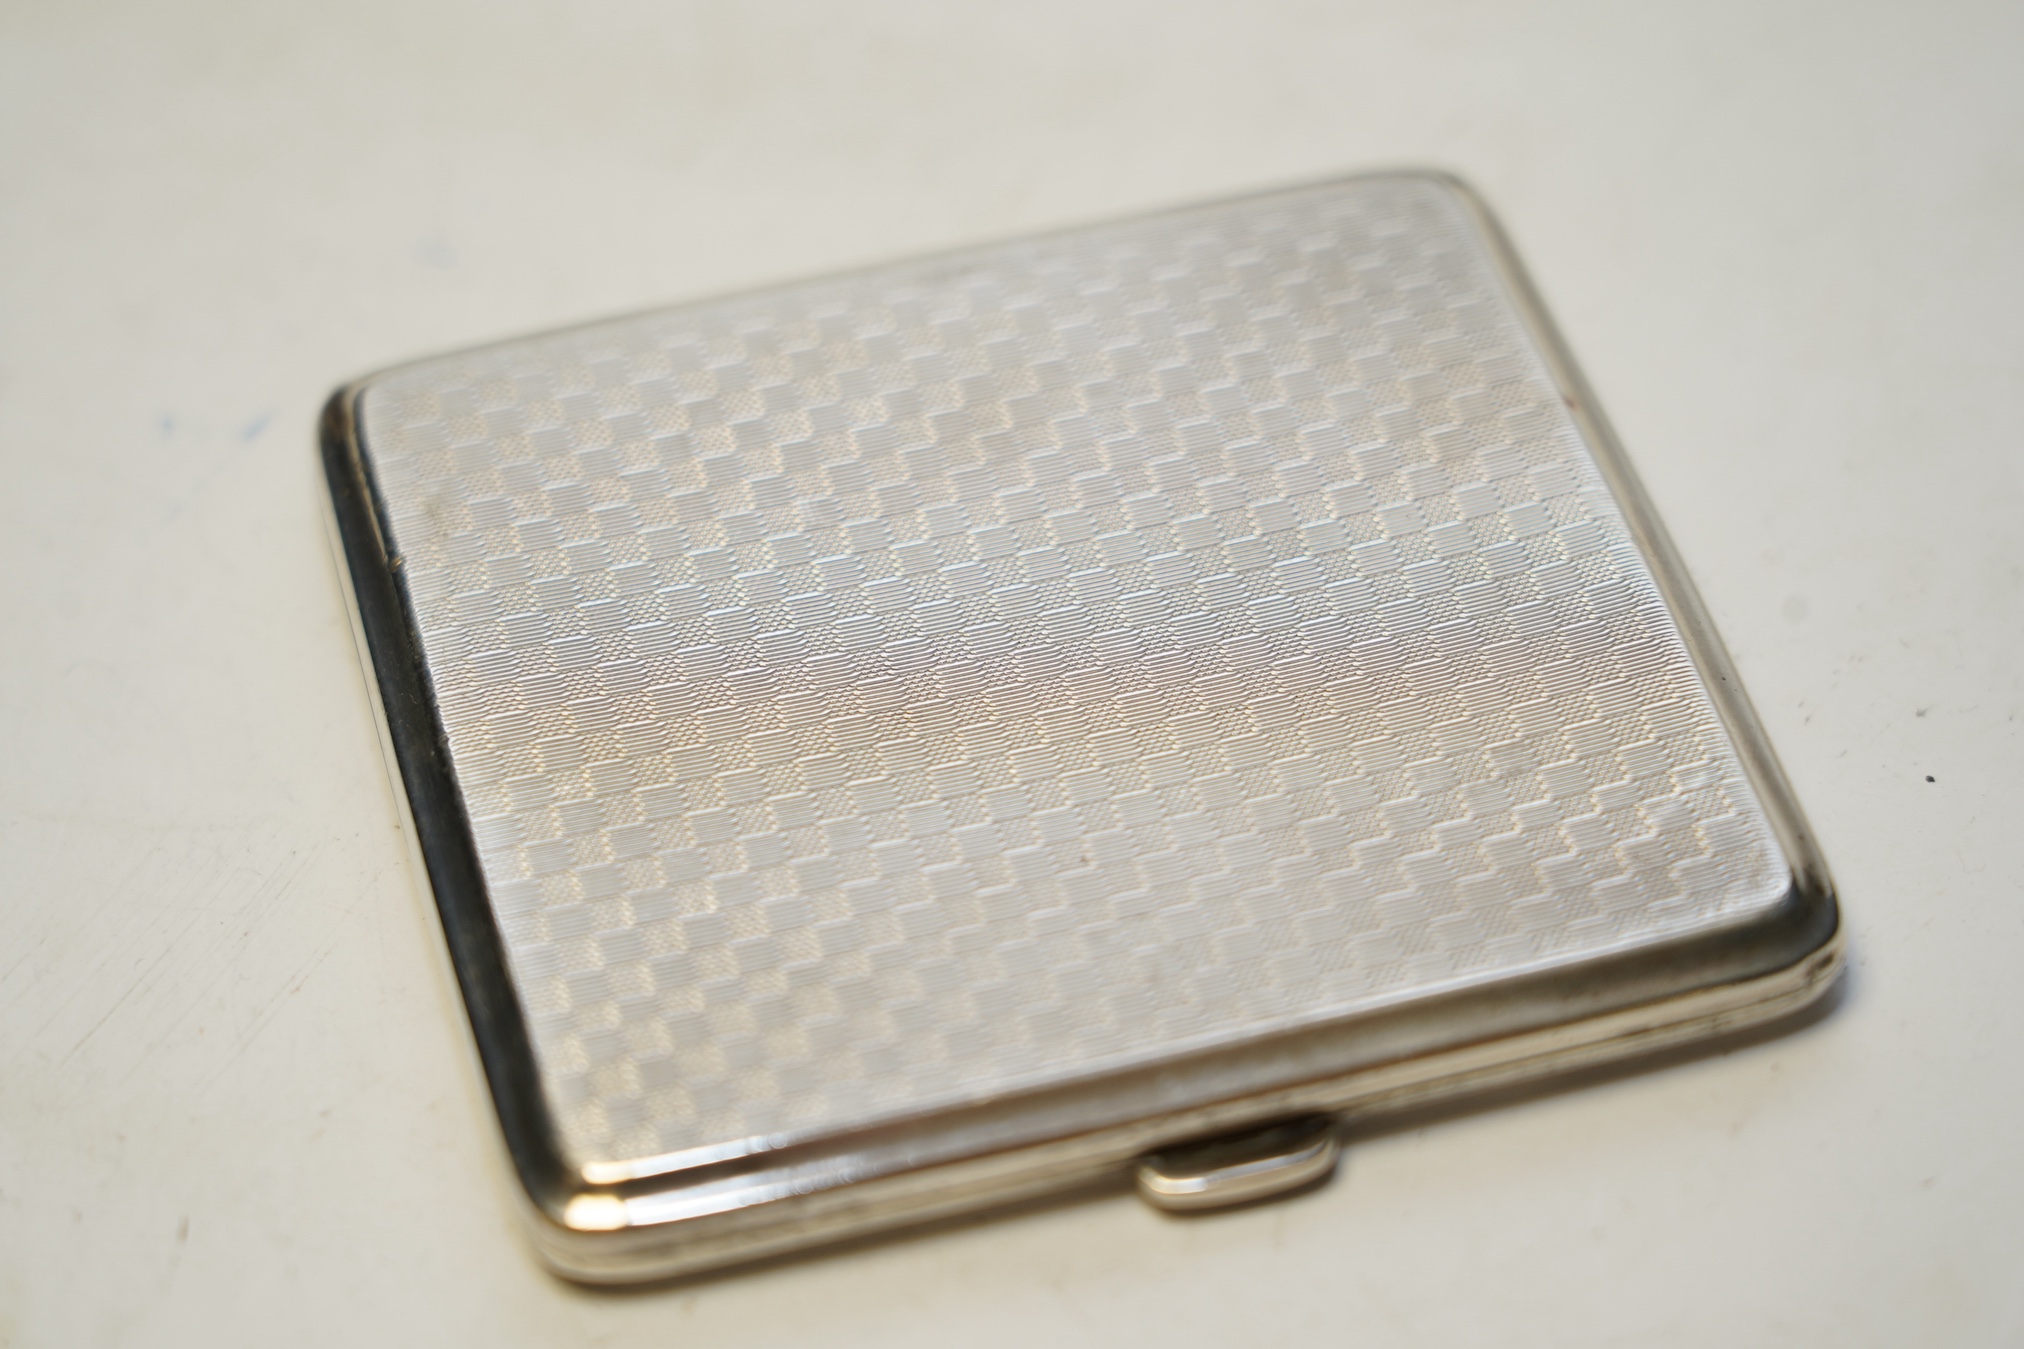 Two early 20th century silver mounted square cigarette boxes, largest 10.1cm, a similar silver cigarette case and three other silver items. Condition - fair to poor